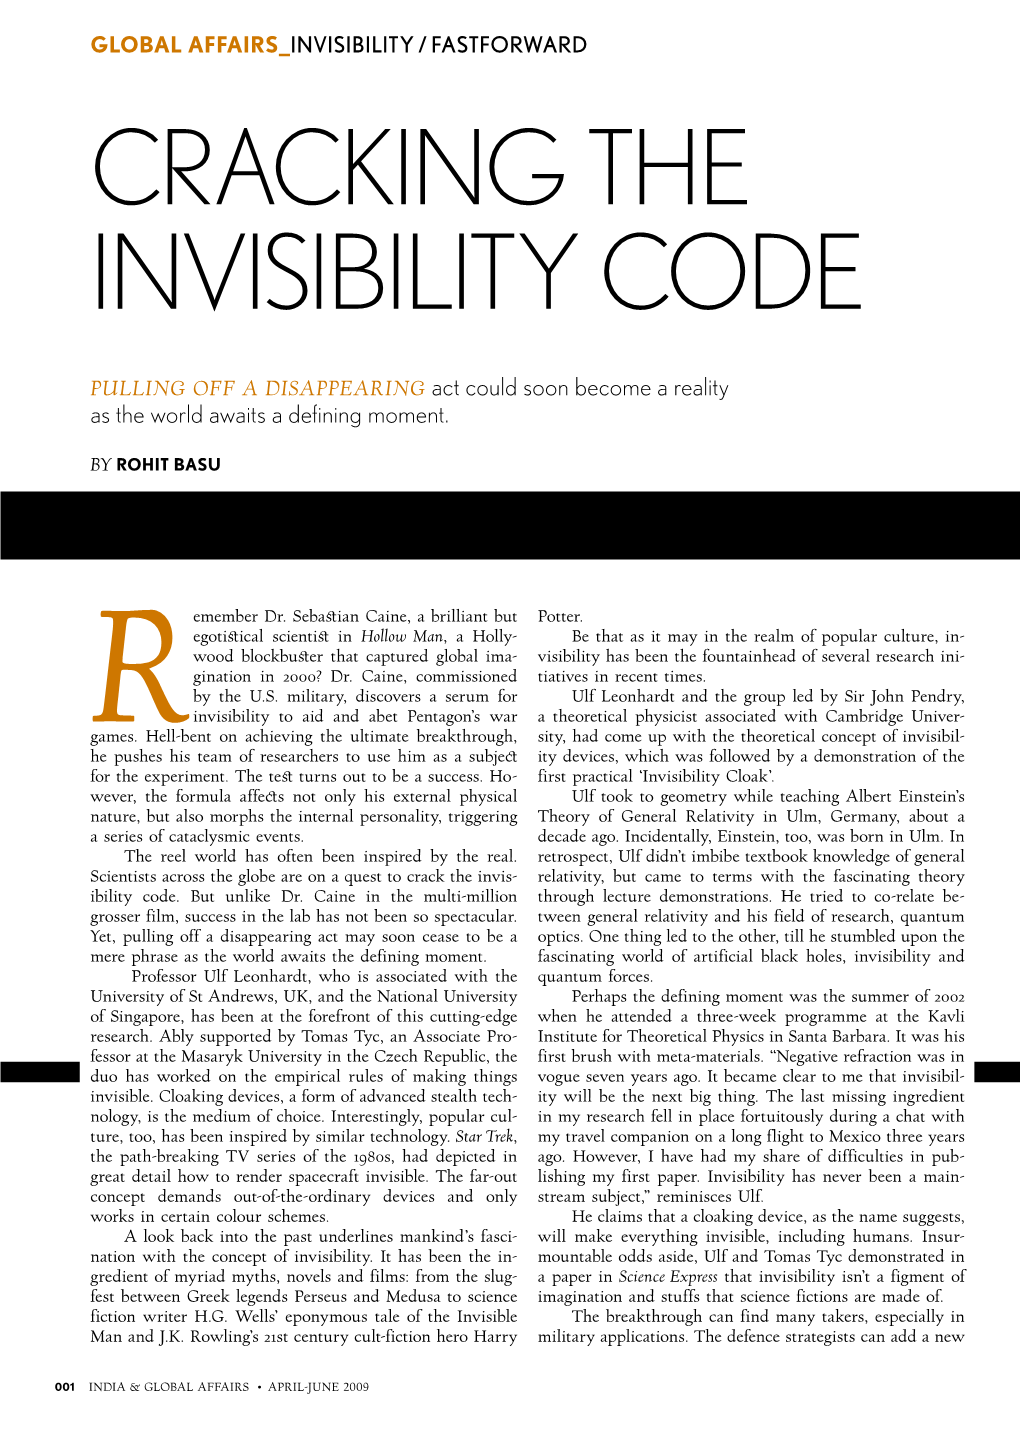 Cracking the Invisibility Code